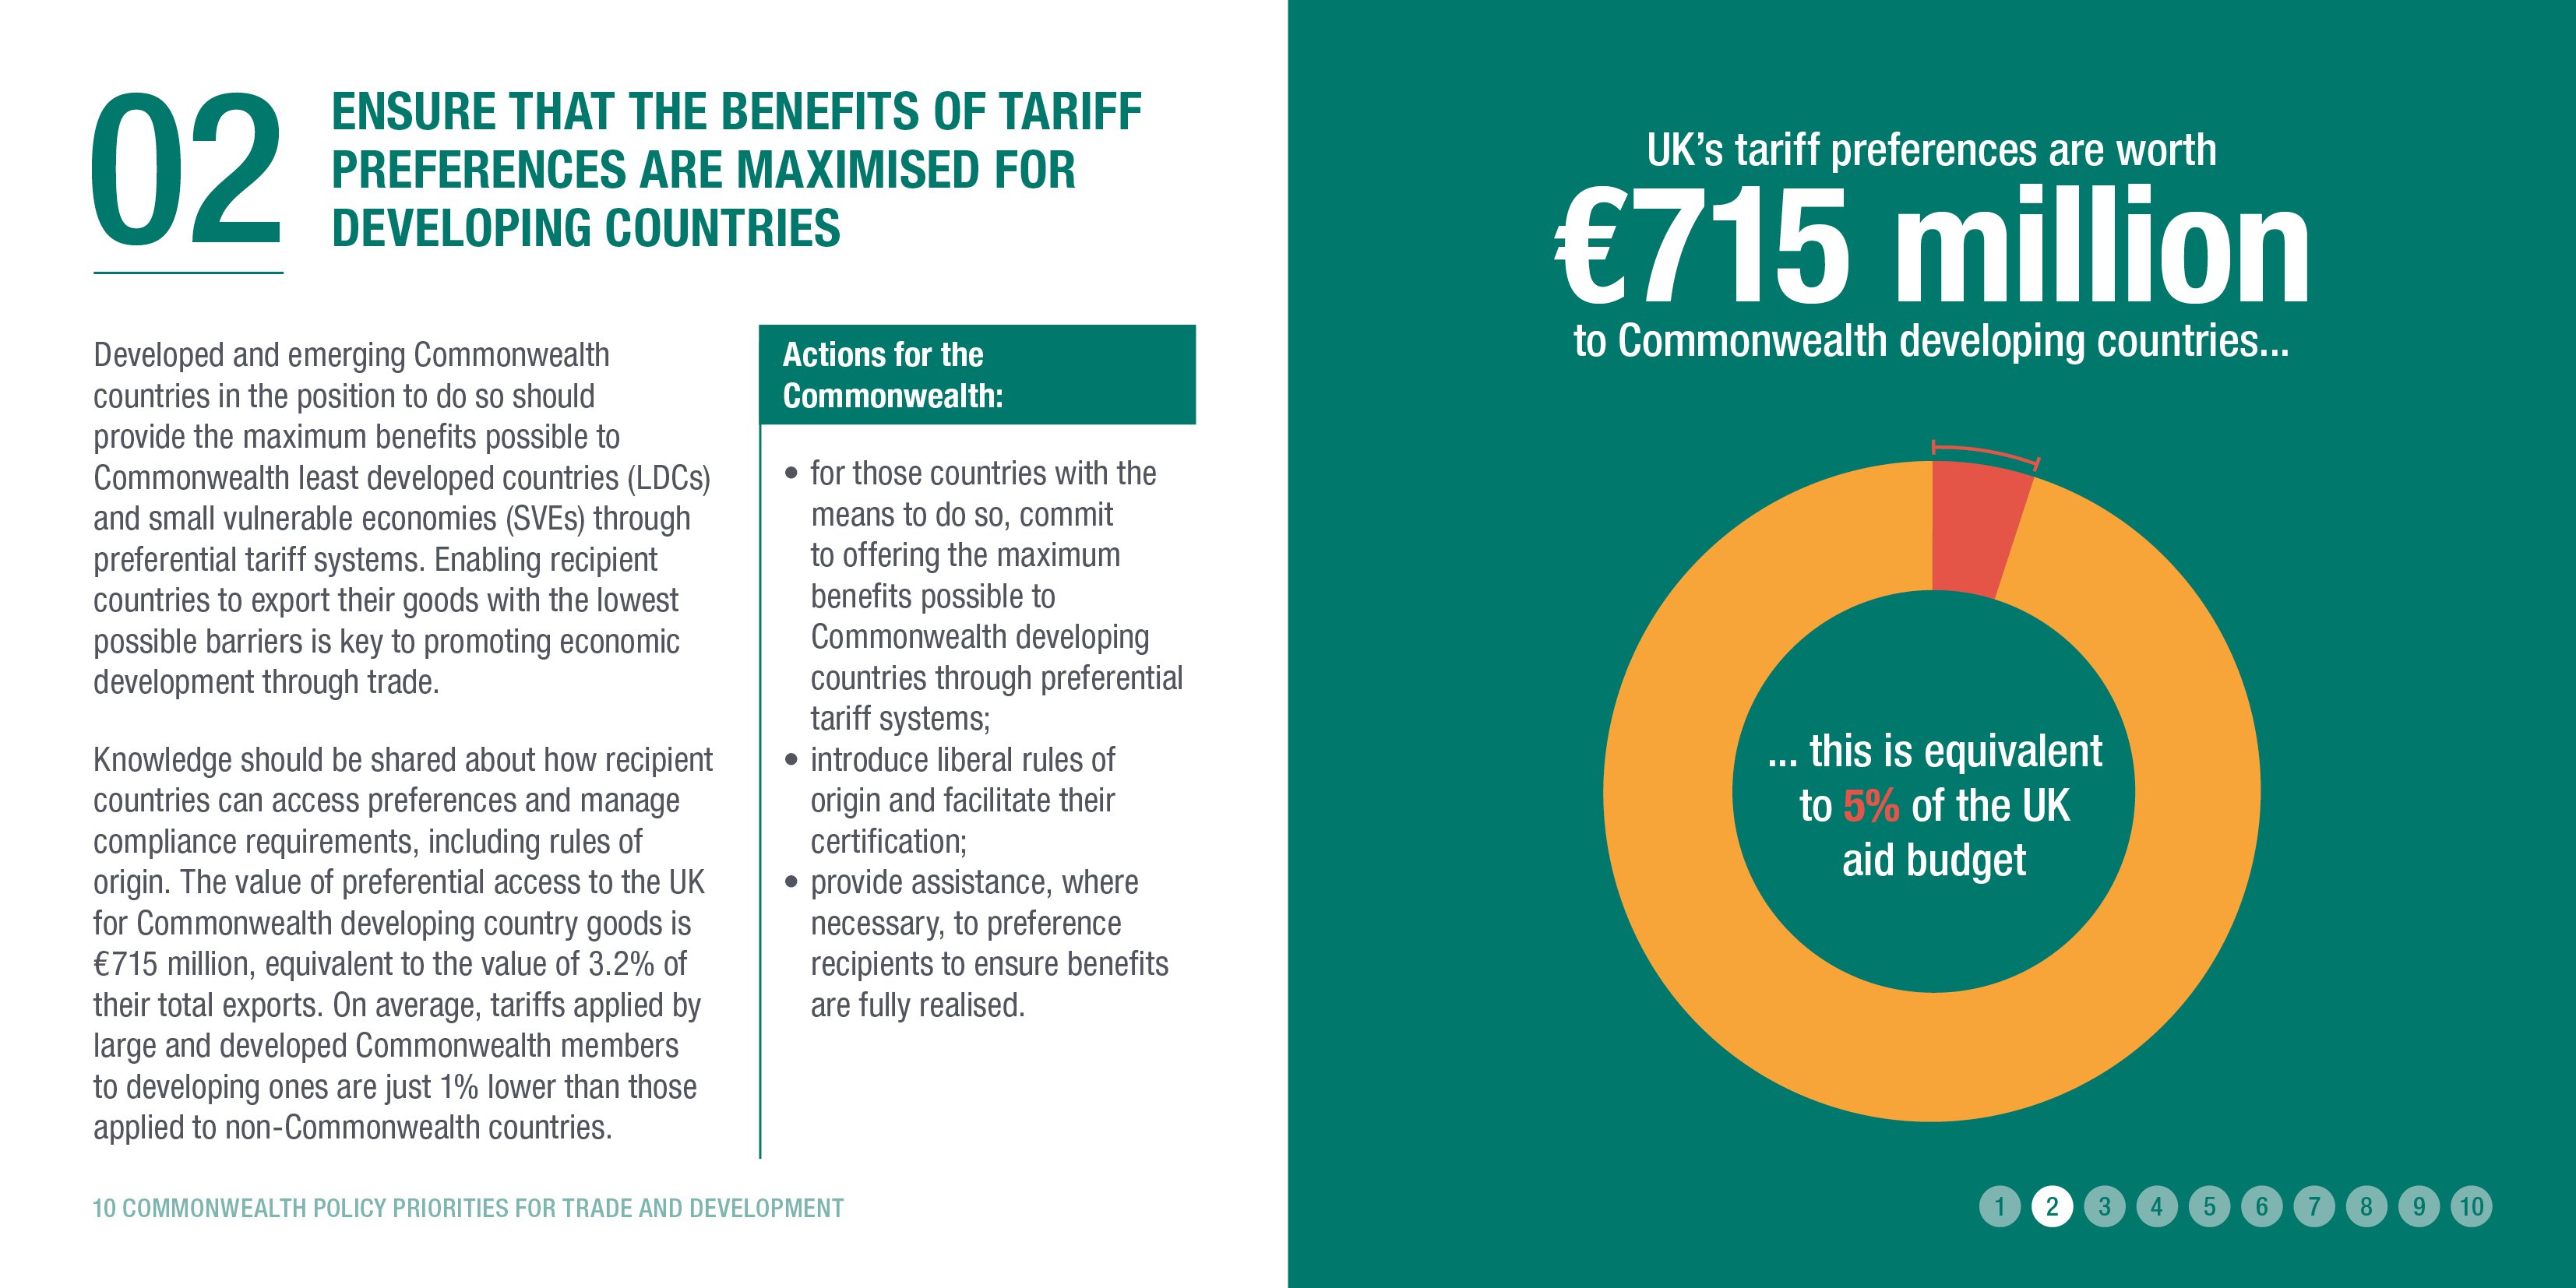 Ensure that the benefits of tariff preferences are maximised for developing countries